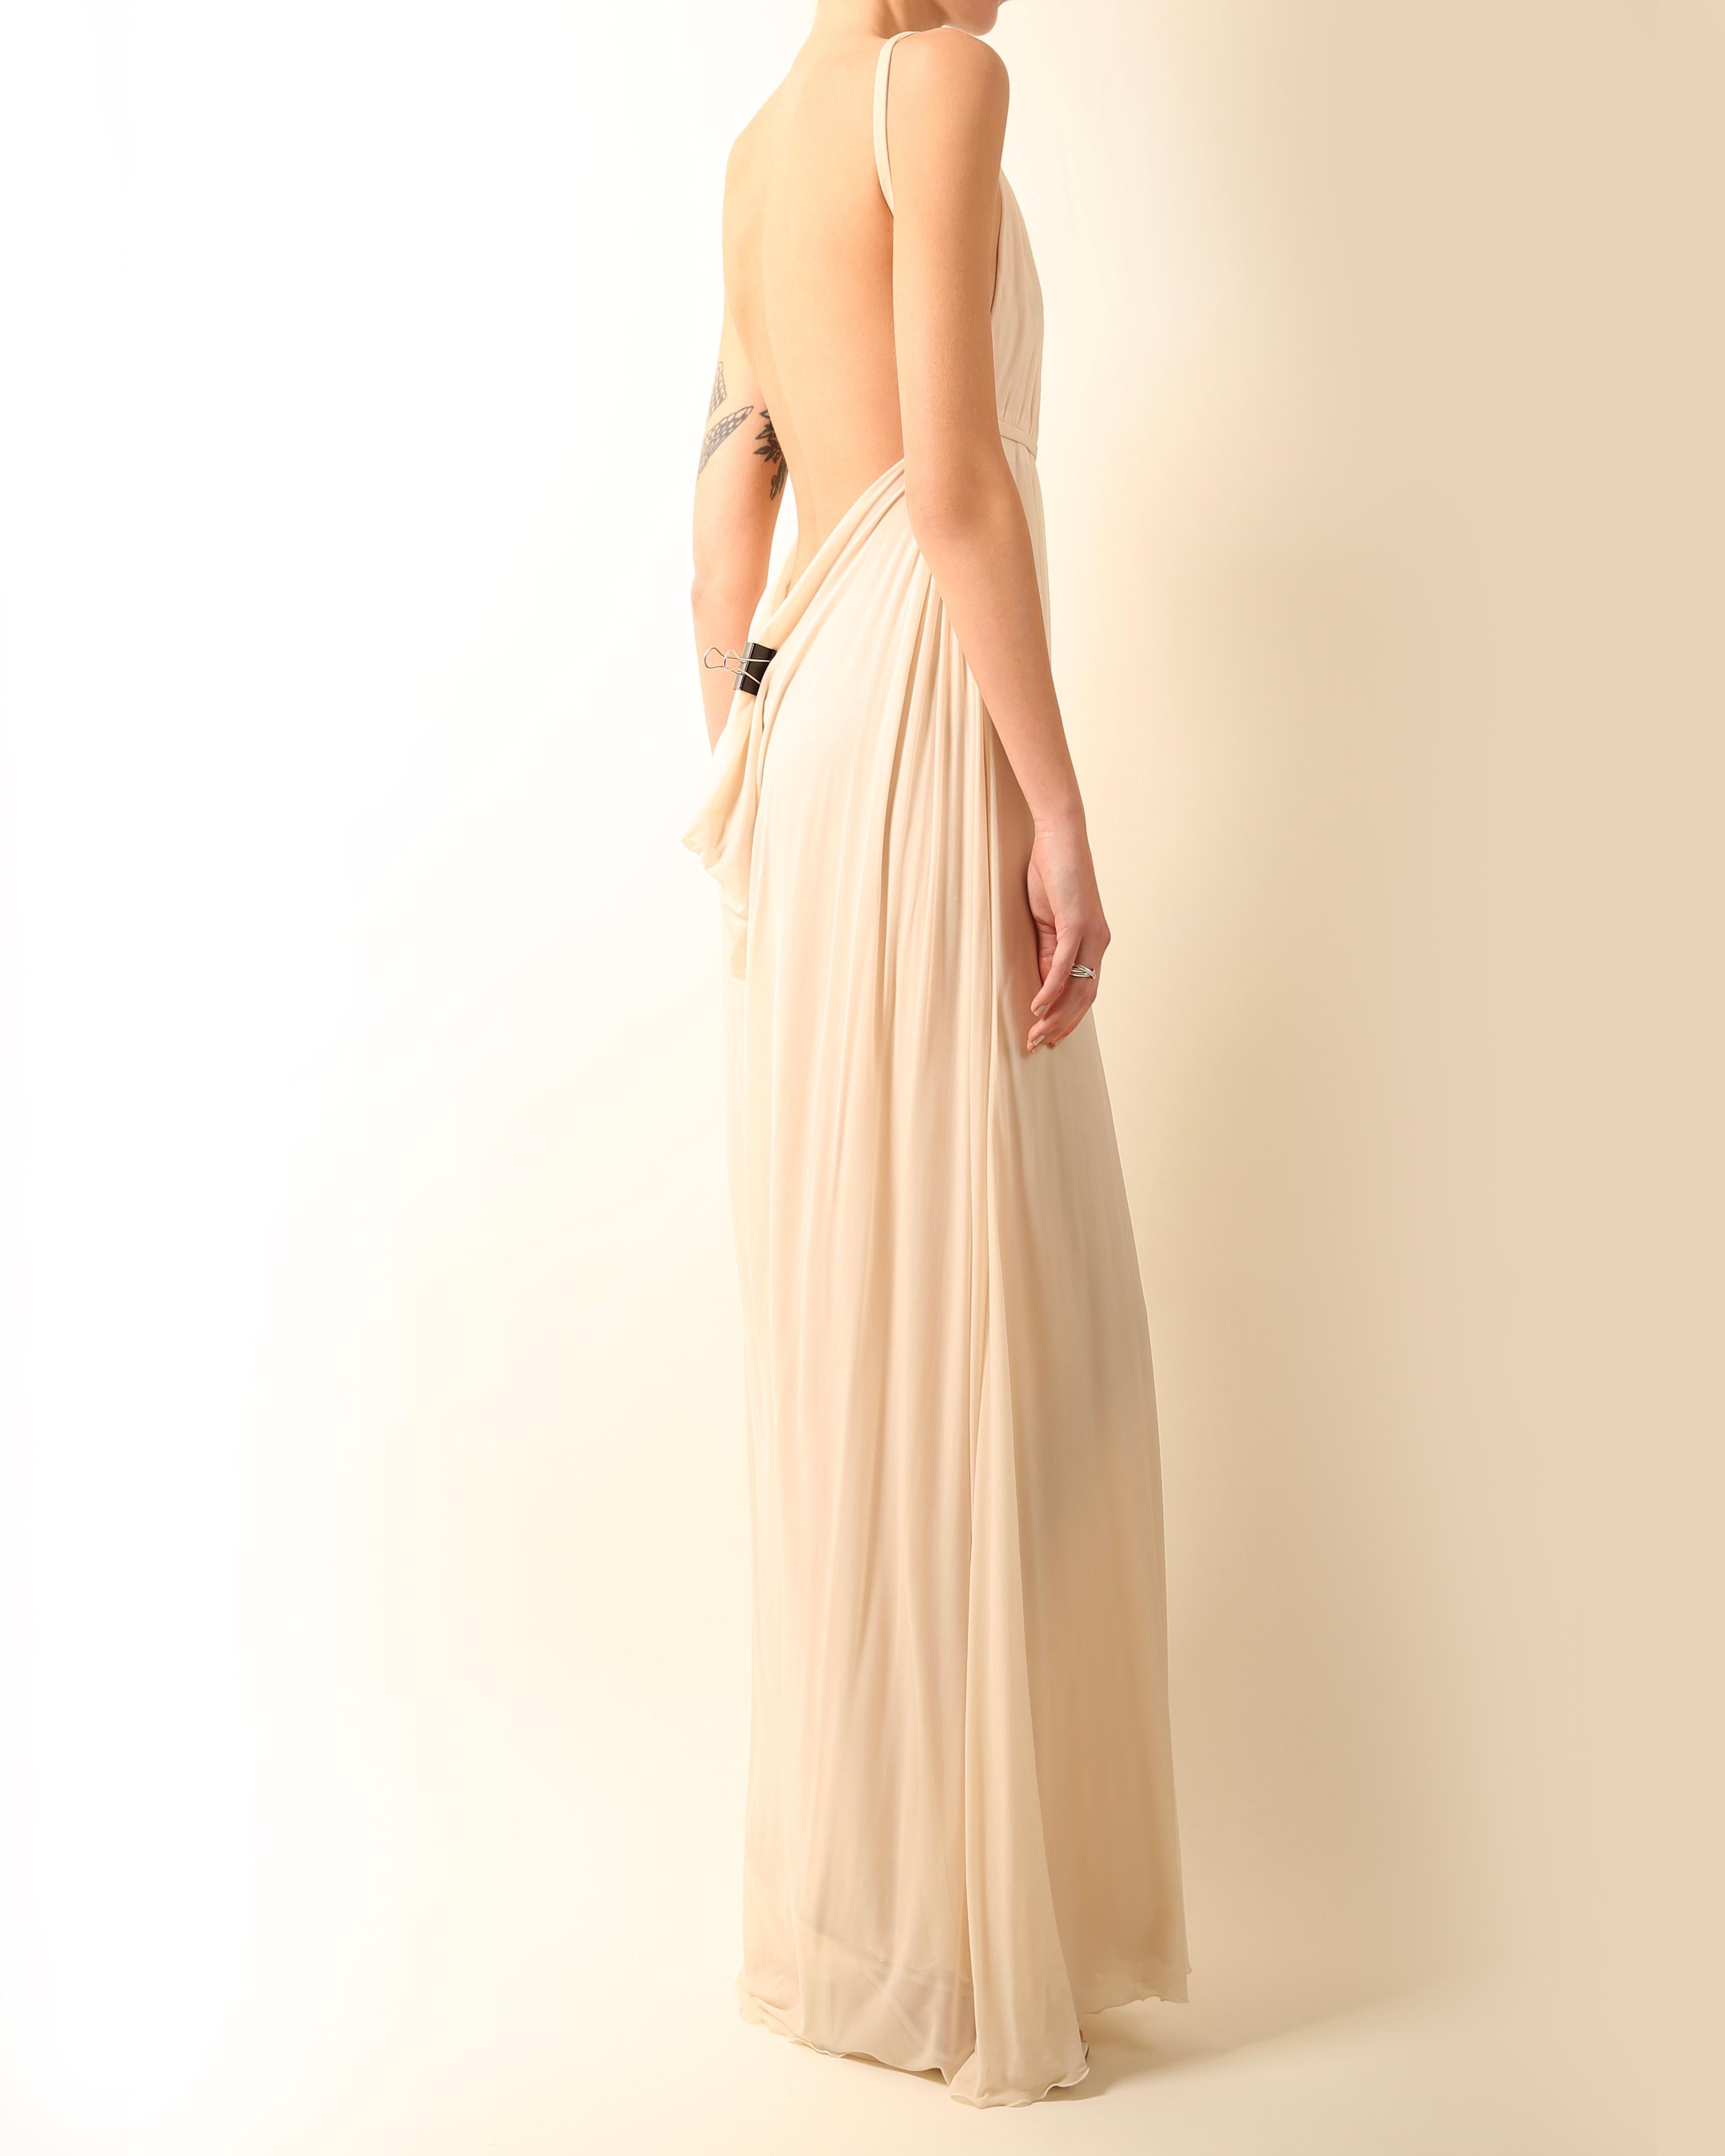 Halston 09 ivory cream plisse grecian style backless wedding maxi dress gown 42 For Sale 3